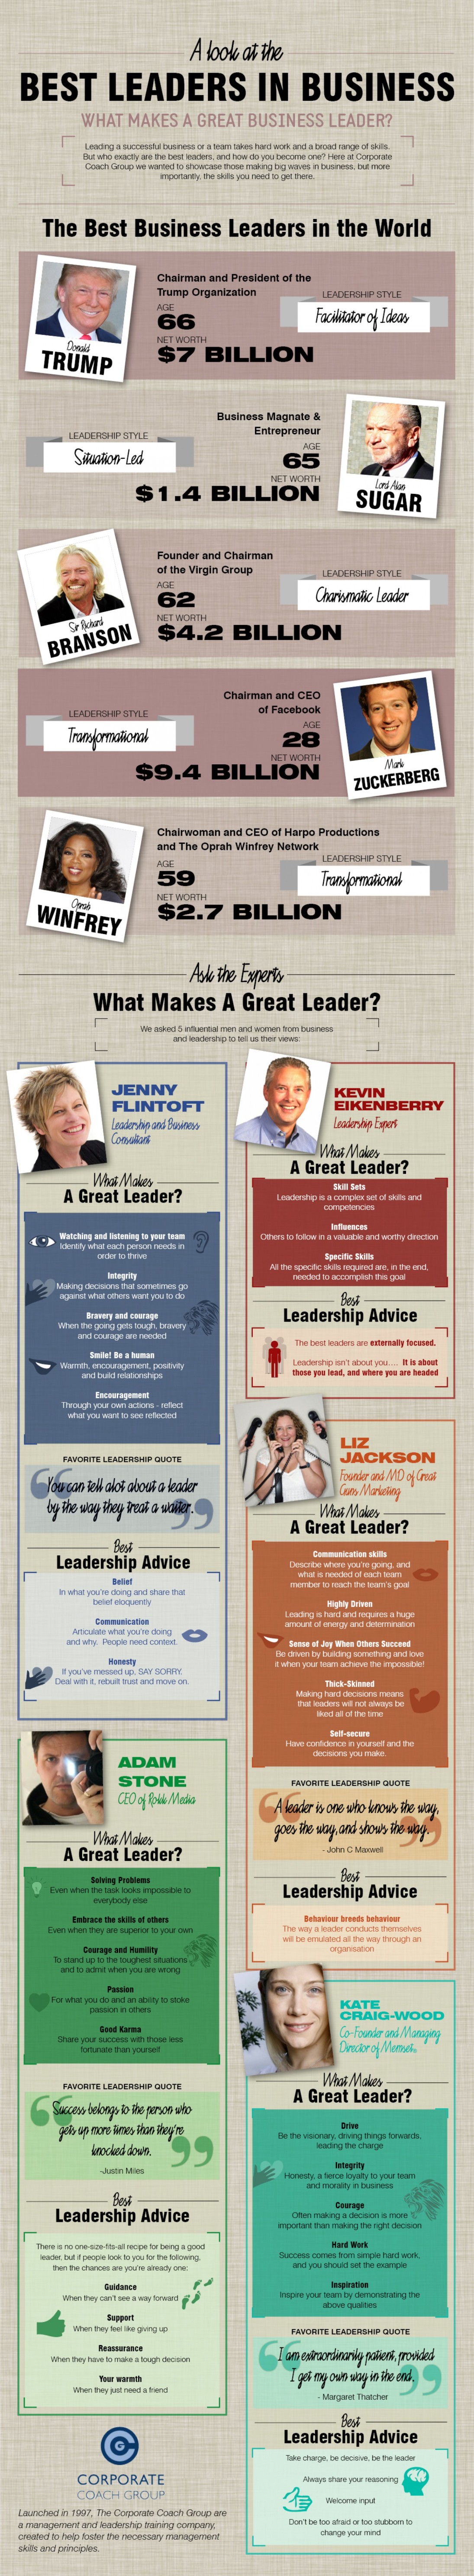 11. What makes a great leader